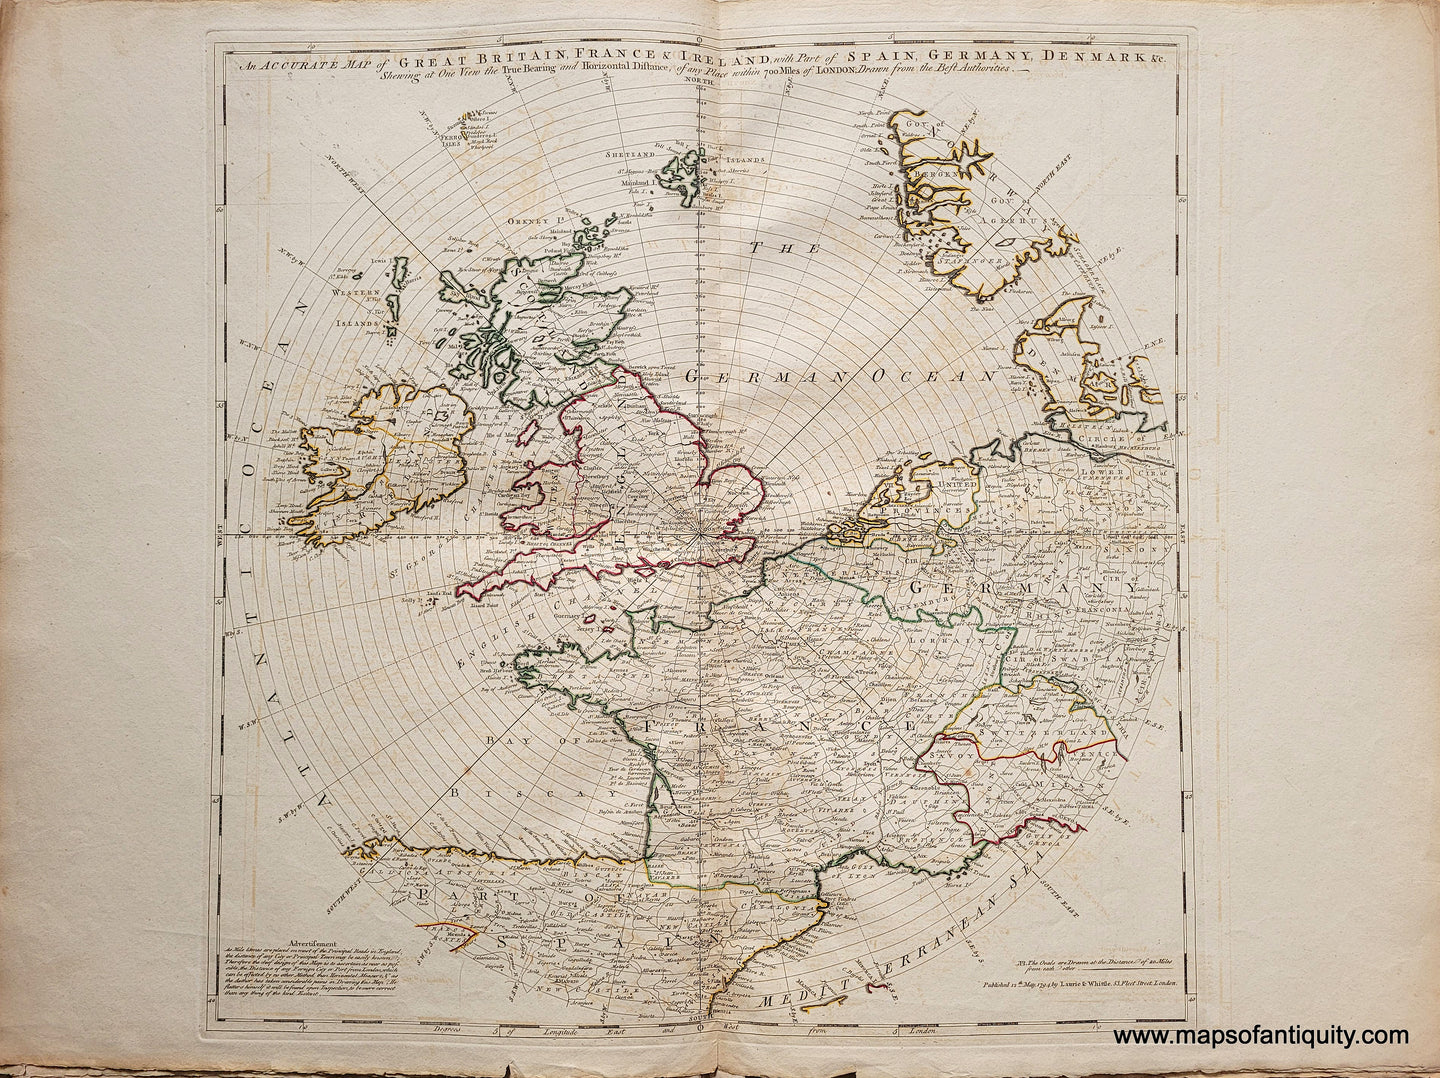 Antique-Hand-Colored-Map-An-Accurate-Map-of-Great-Britain-France-&-Ireland-with-part-of-Spain-Germany-Denmark-&c.-1794-Laurie-&-Whittle-1700s-18th-century-Maps-of-Antiquity